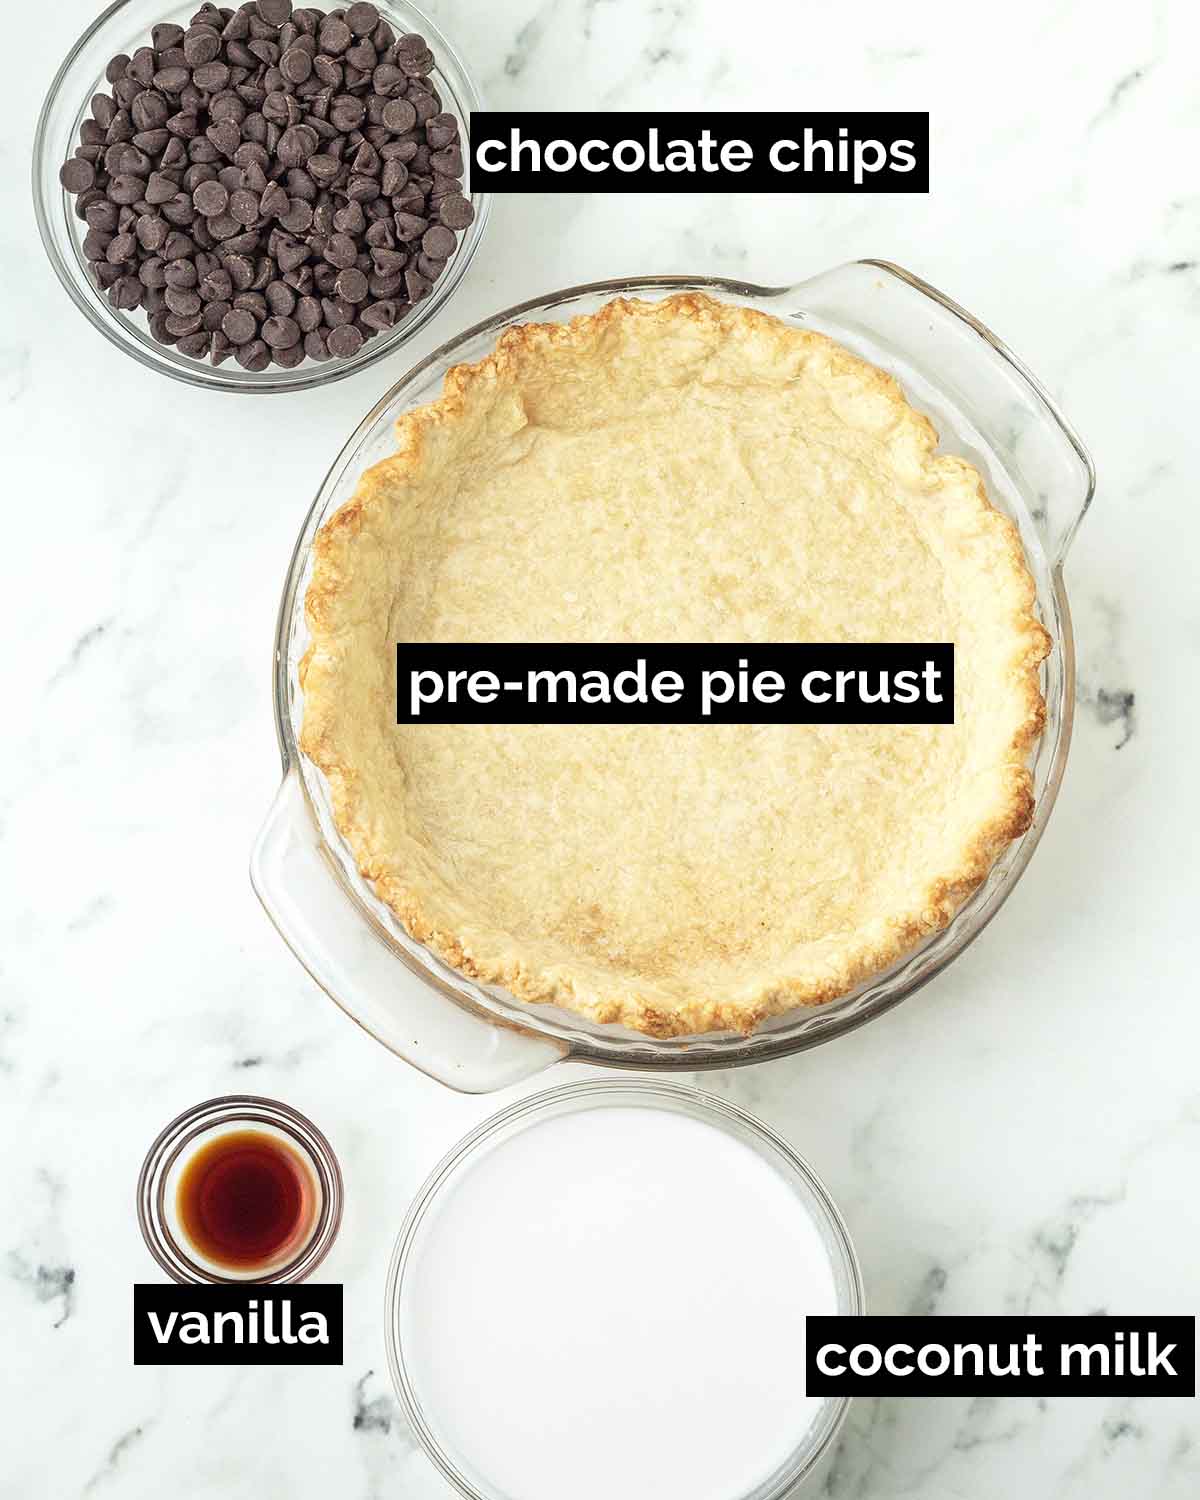 An overhead shot showing the ingredients needed to make vegan chocolate pie.